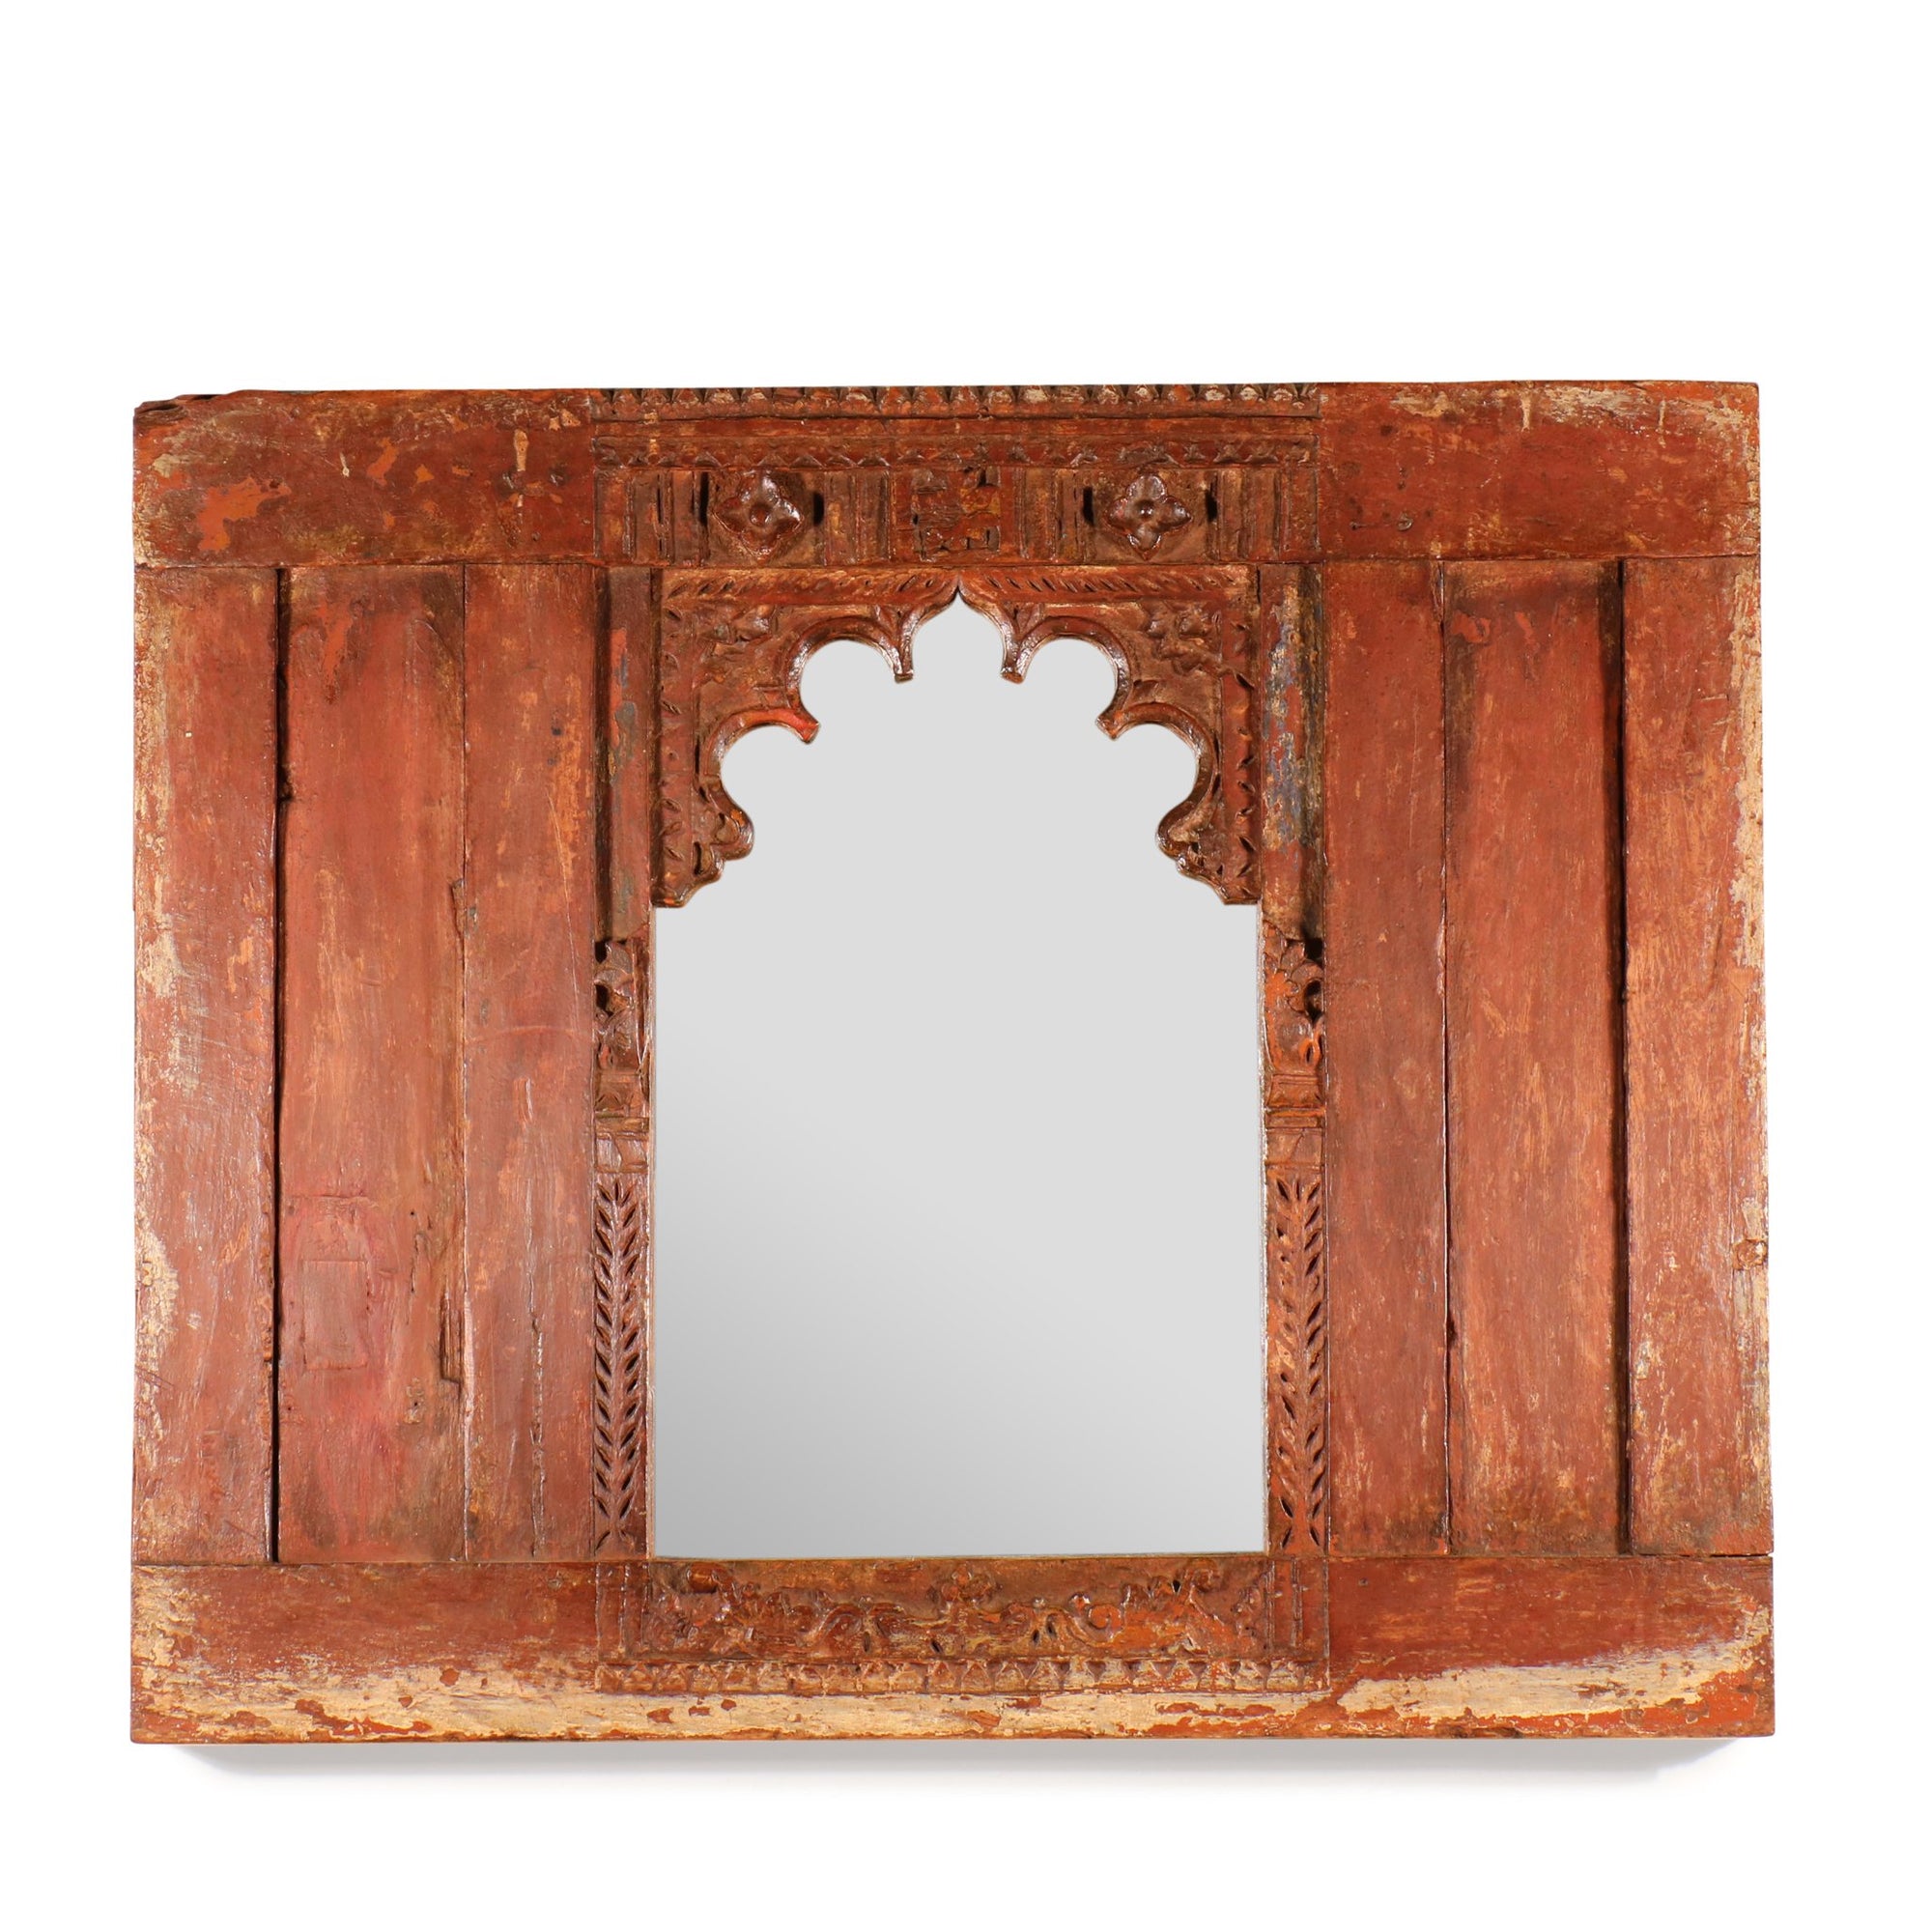 Carved Window Shutter With Mirror-  From Banswara - 19thC - 79 x 9 x 61 (w x d x h cms) - A4054